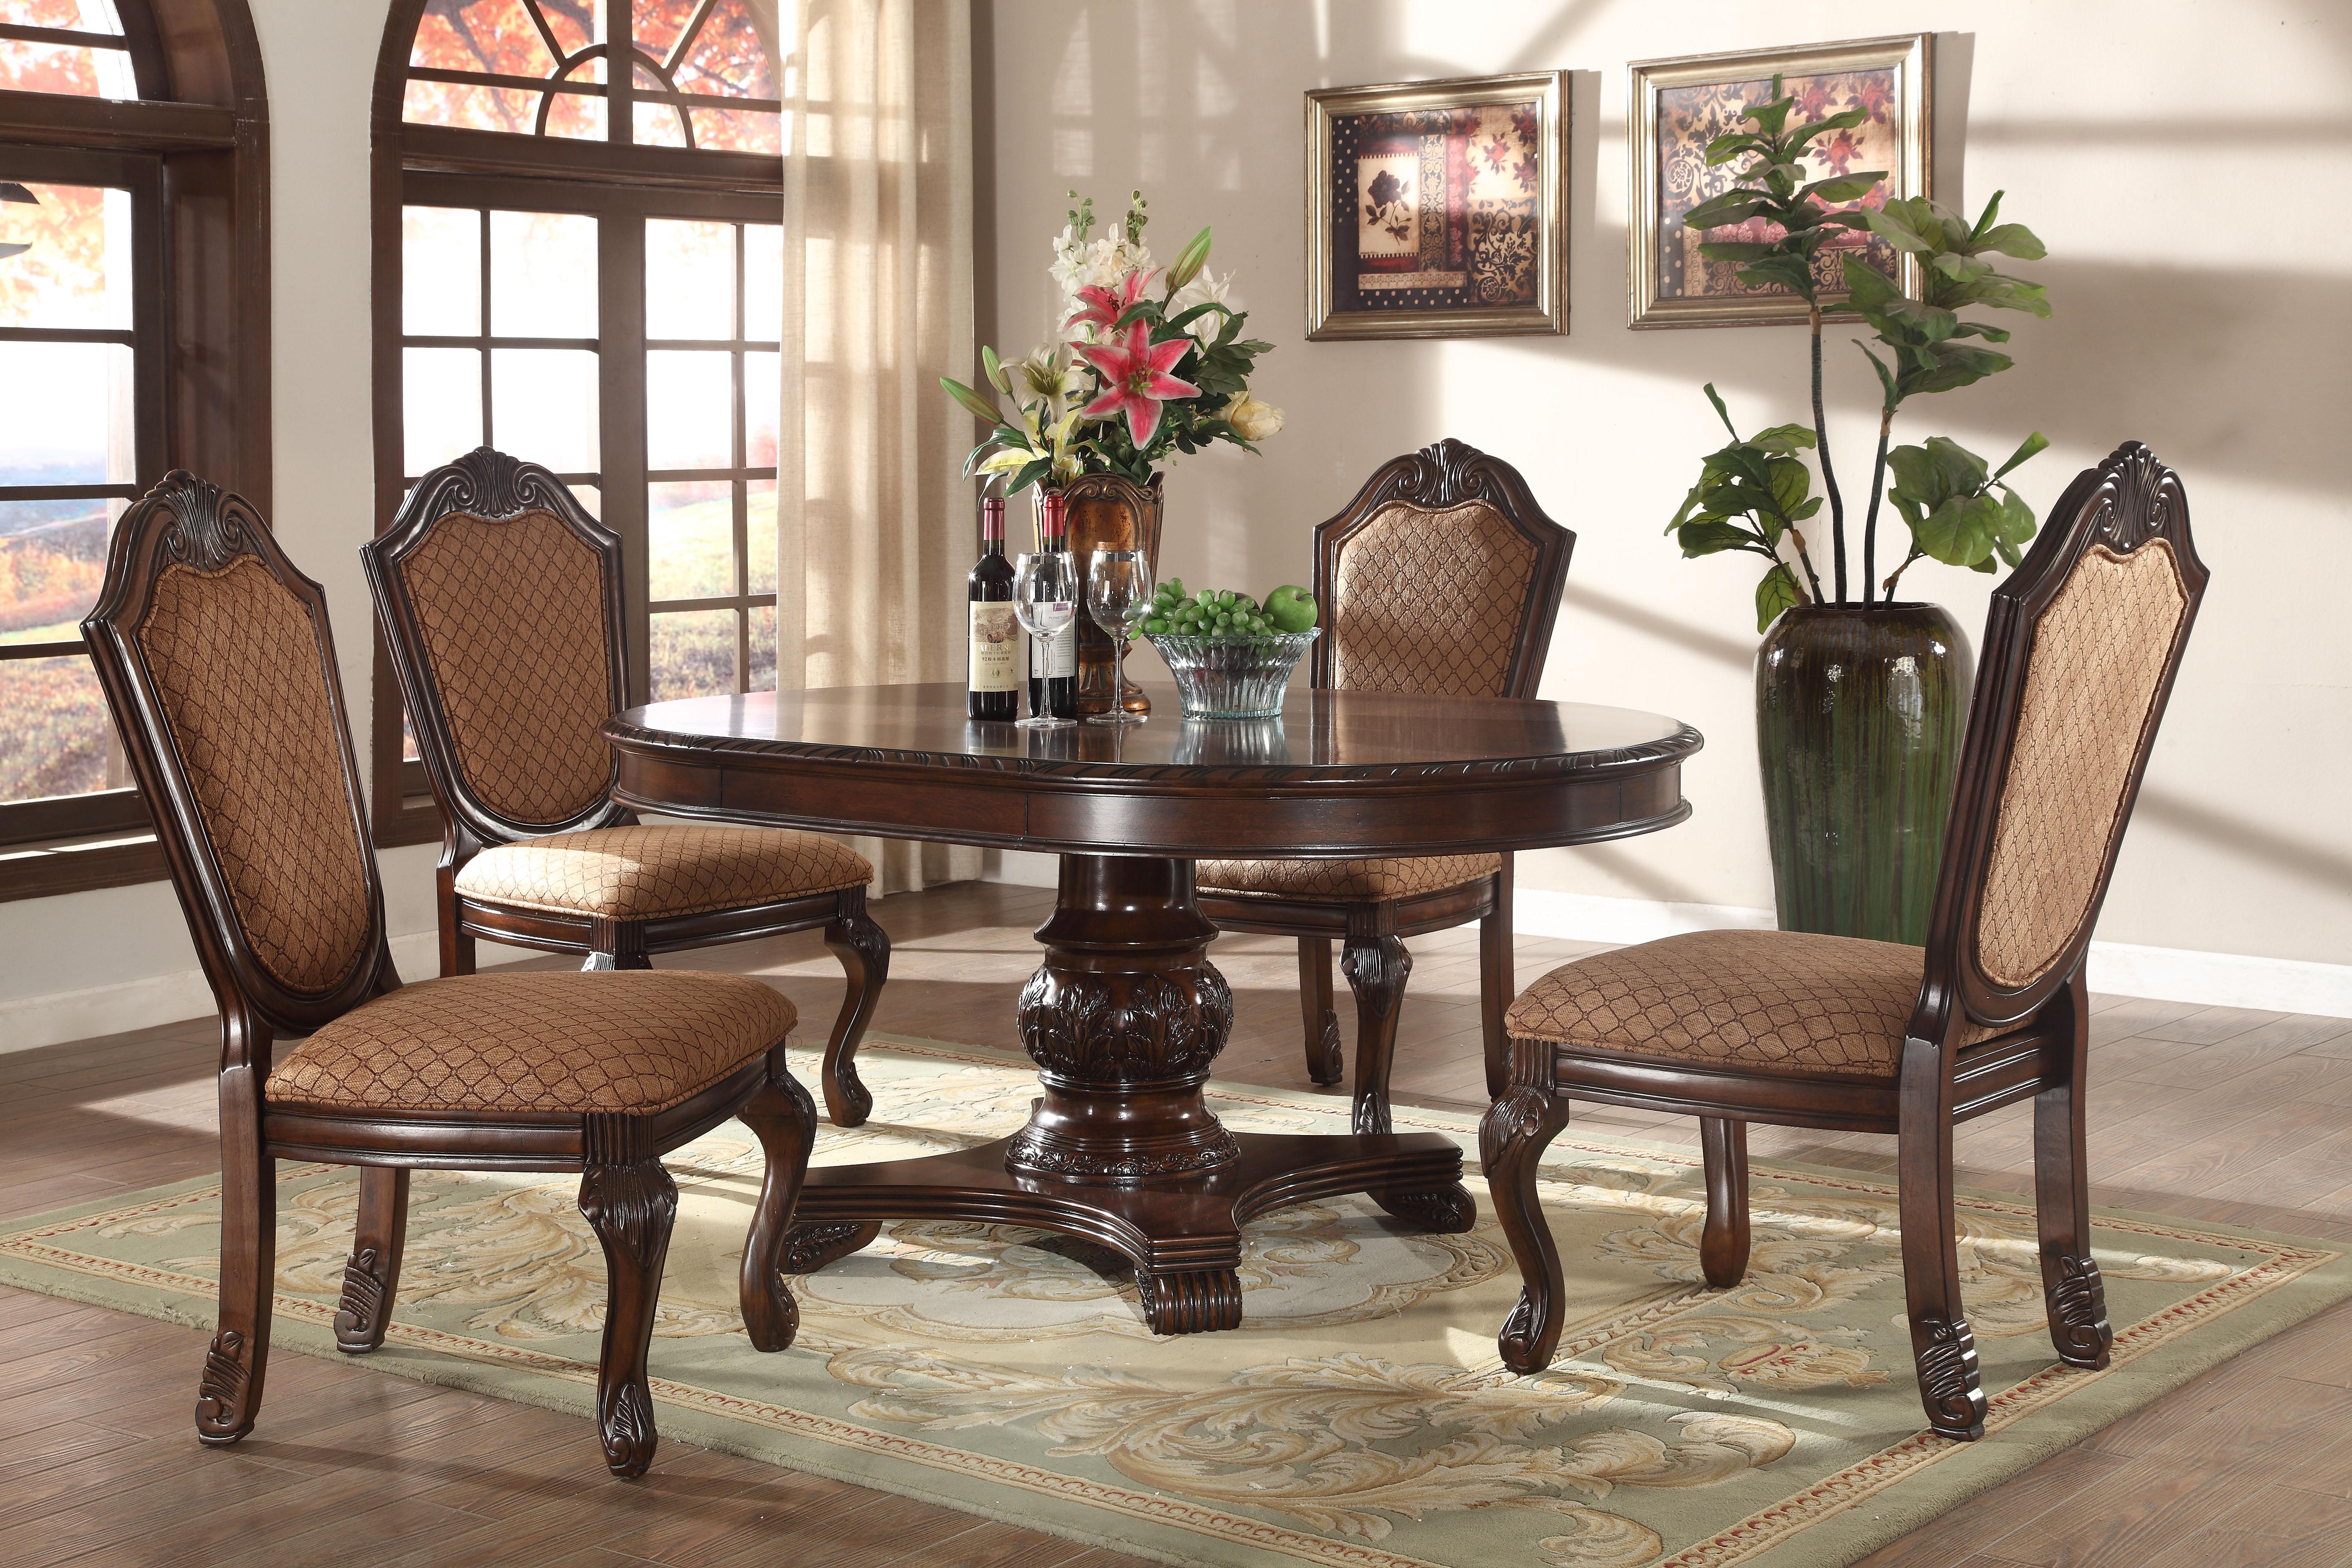 Traditional Dining Table Set D5002-5006 D5002-5006-Set-5 in Cherry PU